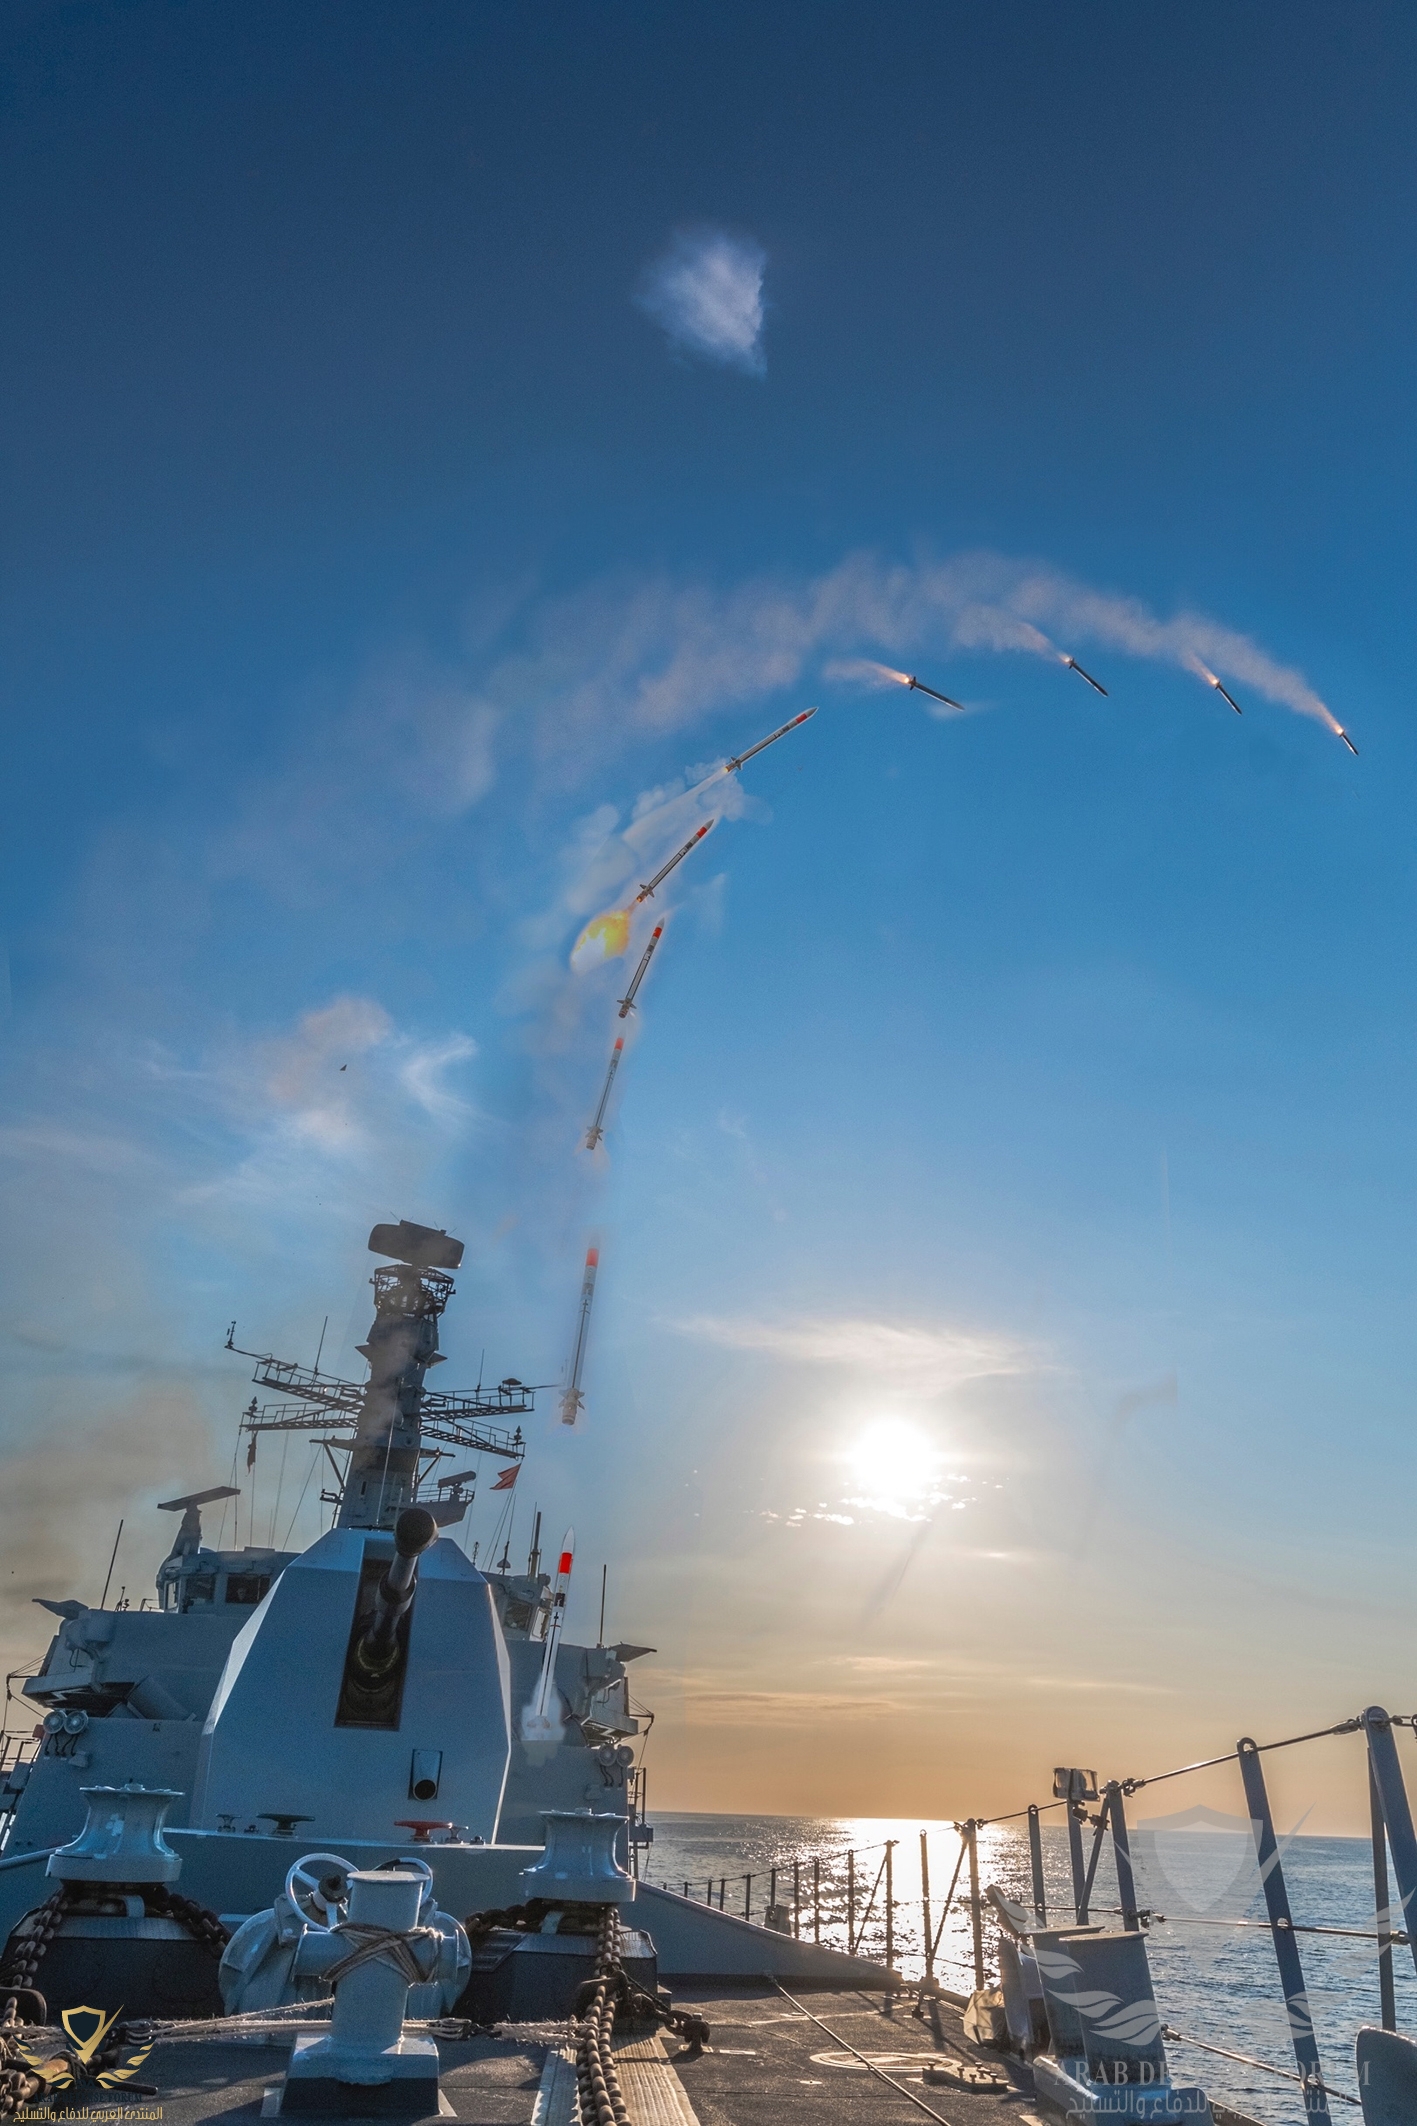 The-Royal-navy-has-conducted-sucessfull-initial-firings-of-MBDA-Sea-Ceptor-new-air-defence-sys...jpg